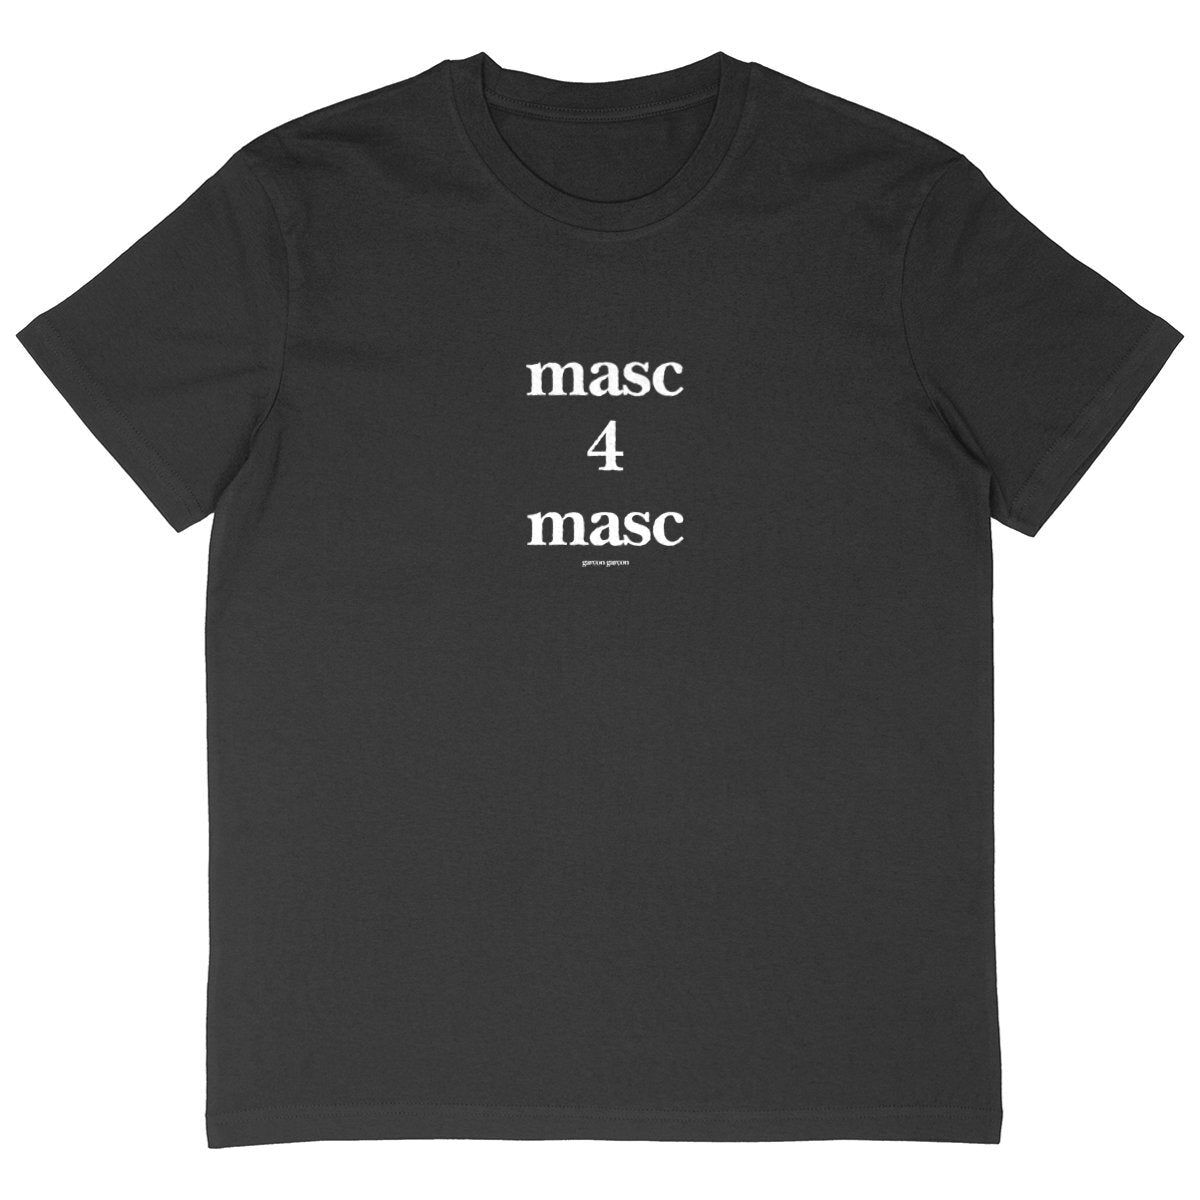 masc 4 masc black tee oversized.garçon garçon tee oversize BLACK. Dive into the essence of Parisian cool with this oversized tee. The subtle 'garçon garçon' signature whispers a chic narrative, offering a slice of the city's famed elegance. Perfect for those who speak style with simplicity.